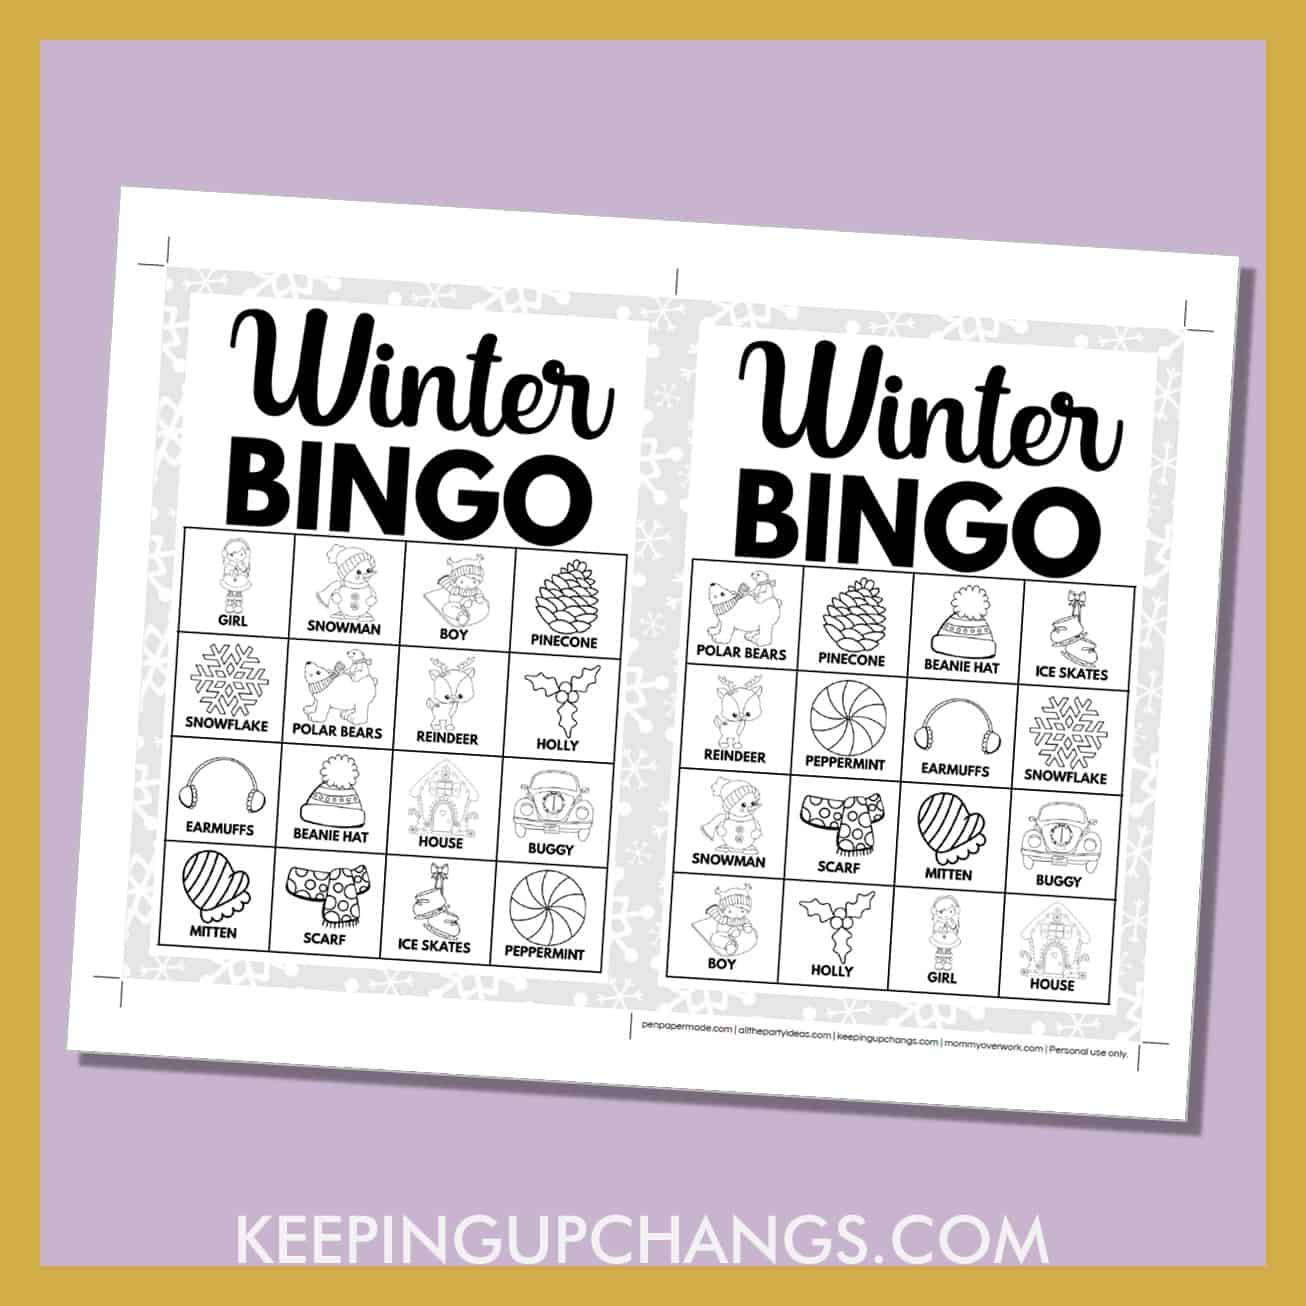 free winter bingo card 4x4 5x7 game boards with black, white images and text words.